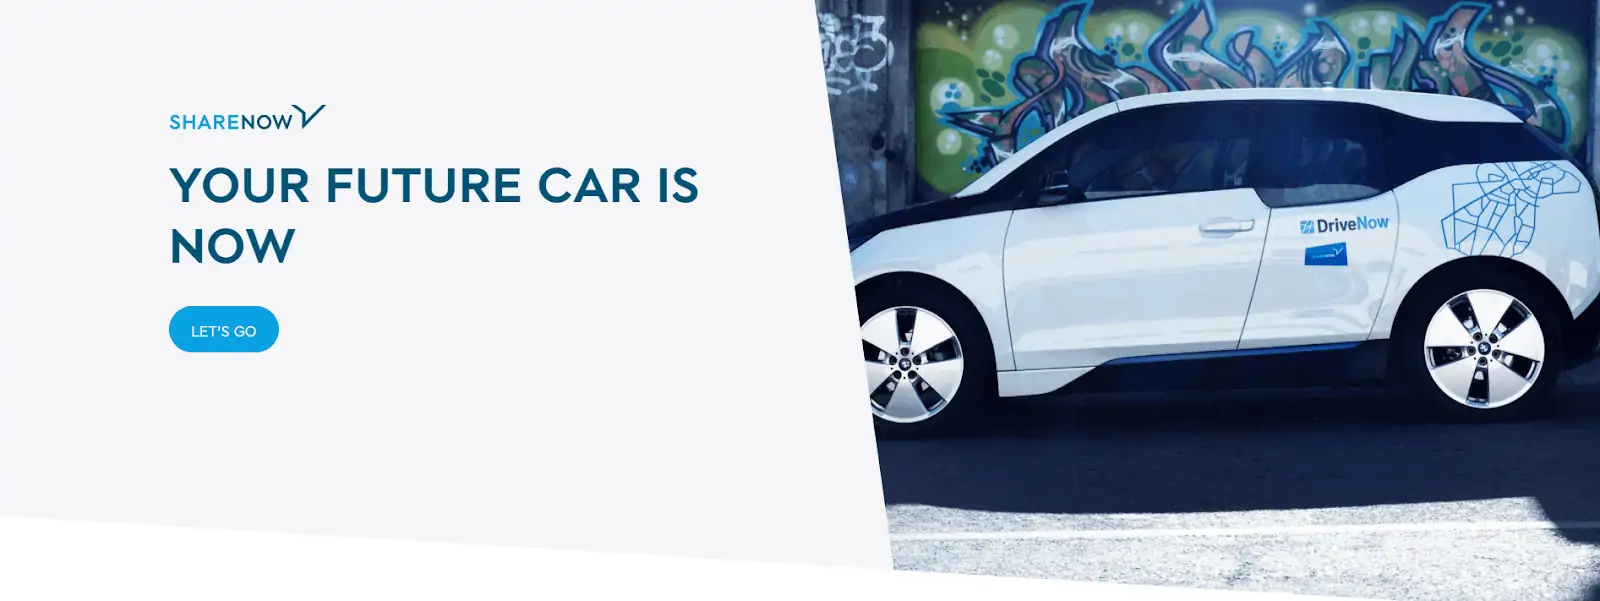 SHARENOW homepage, formerly Car2go